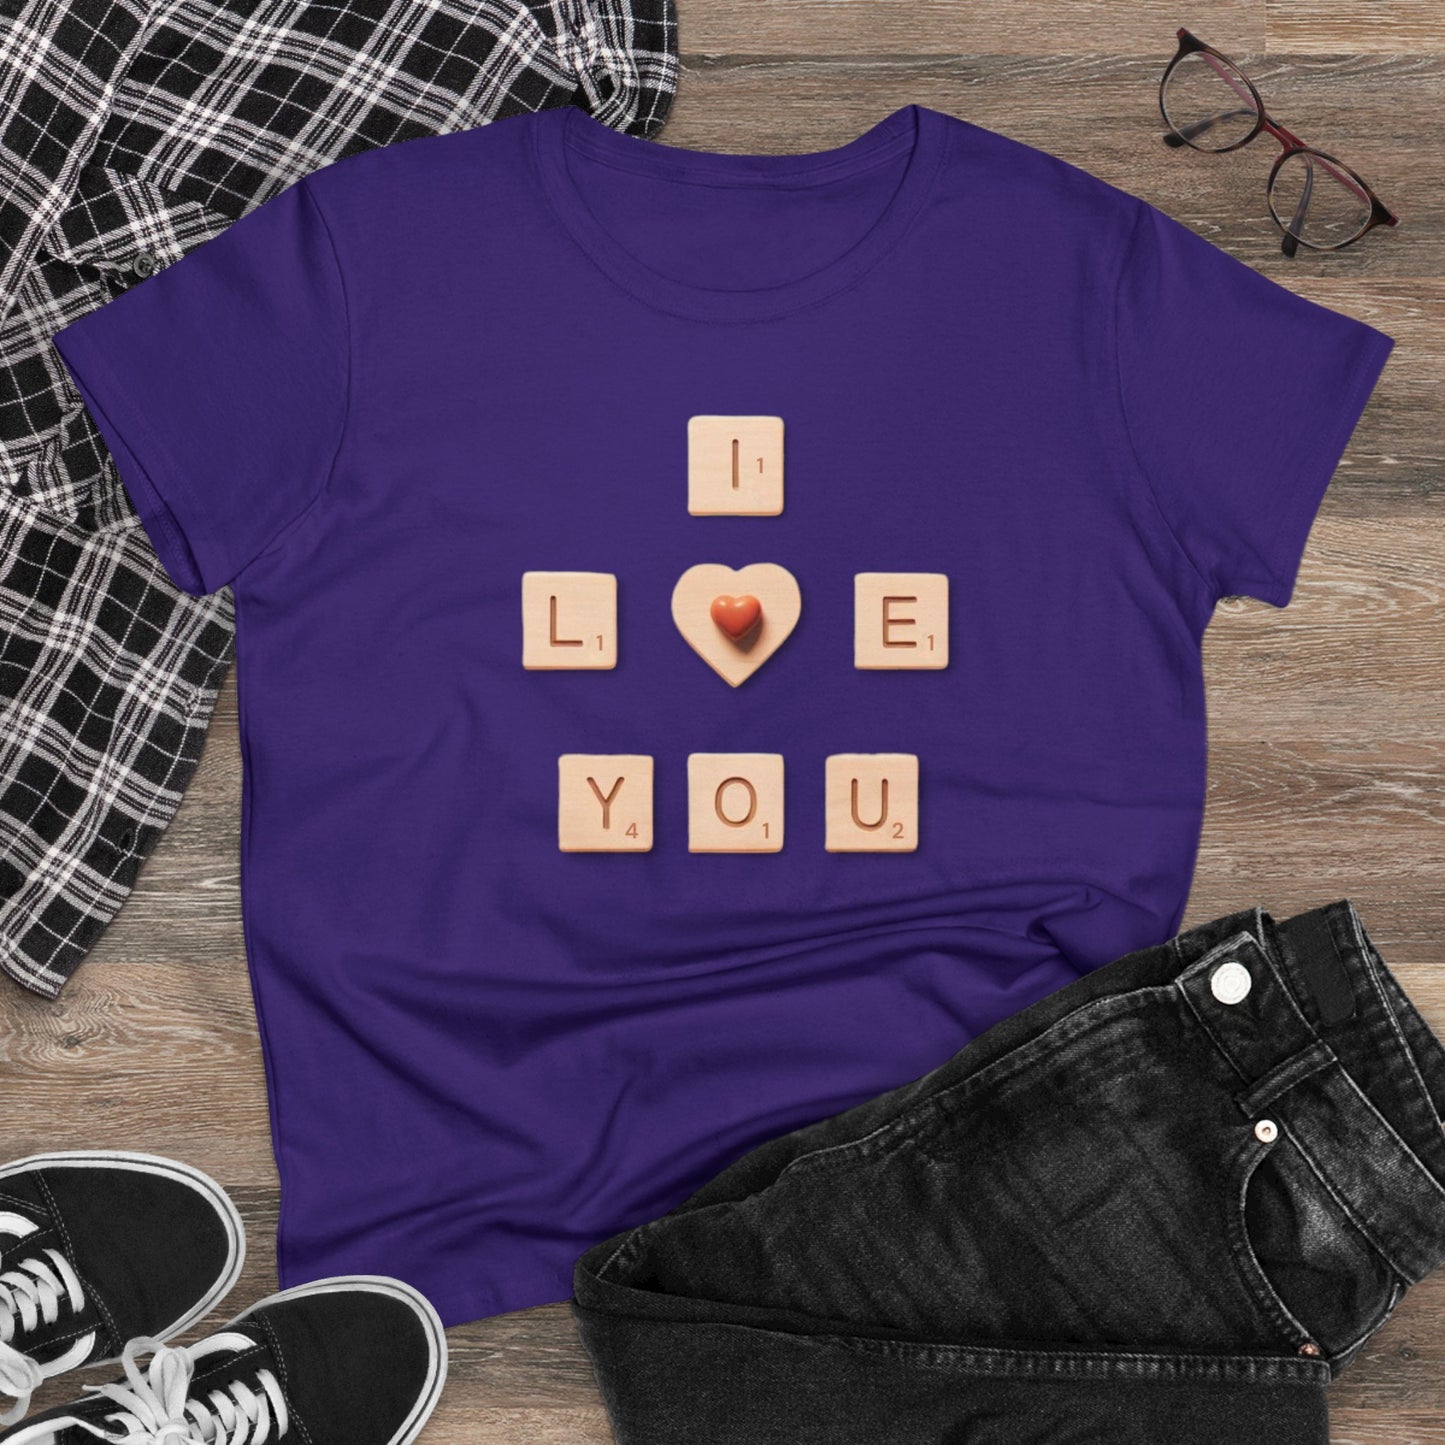 Tile Talk: Women's 'I Love You' Scrabble Graphic Tee - Spellbound Affection! Midweight Cotton Tee